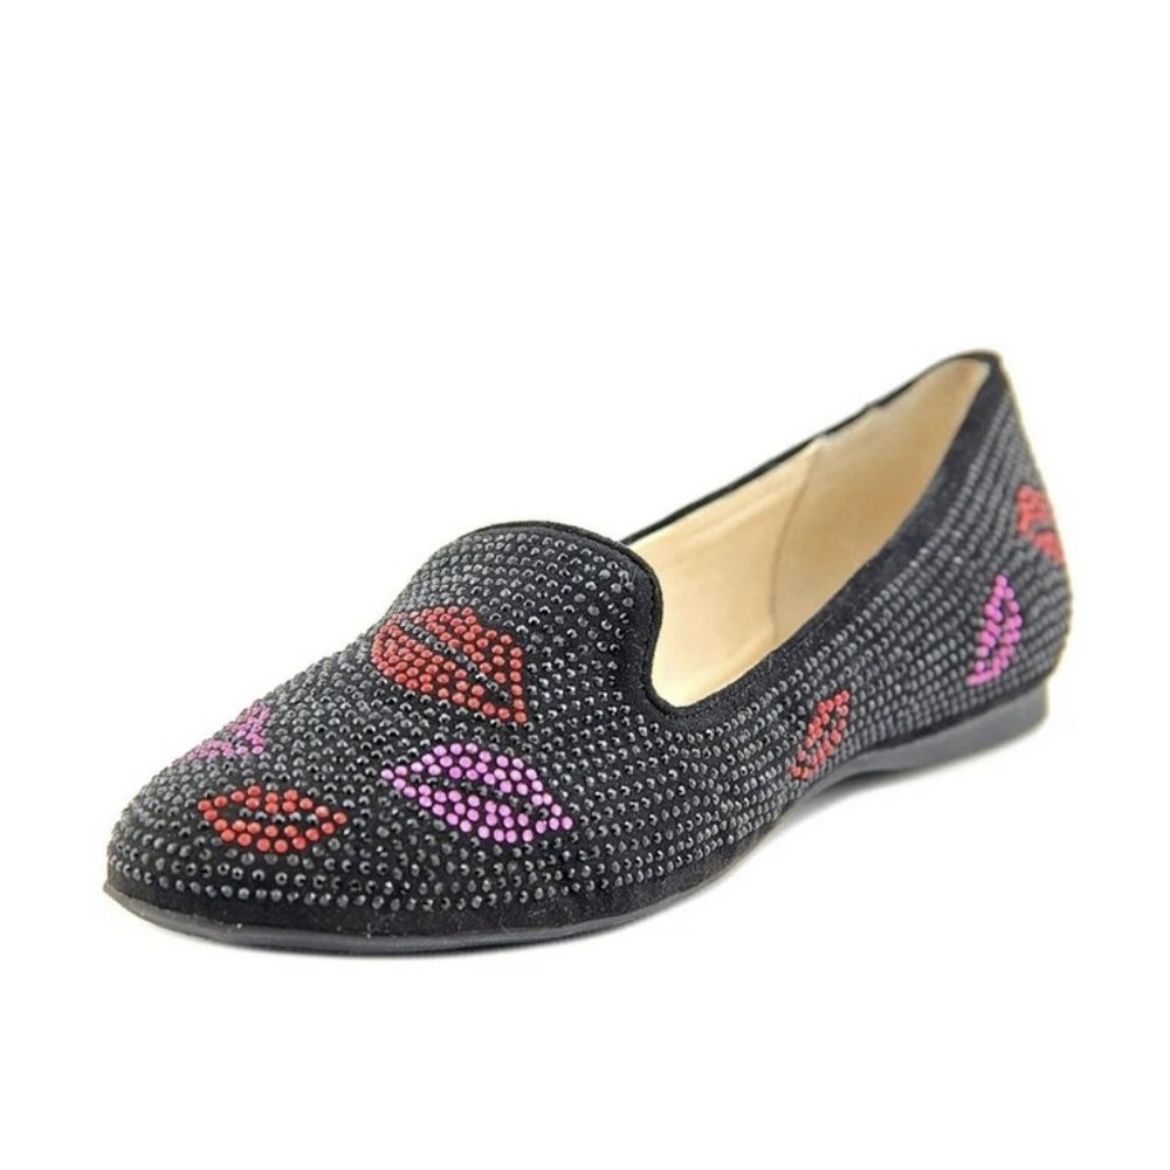 INC Rhinestone Bedazzled Kisses & Lips Loafers